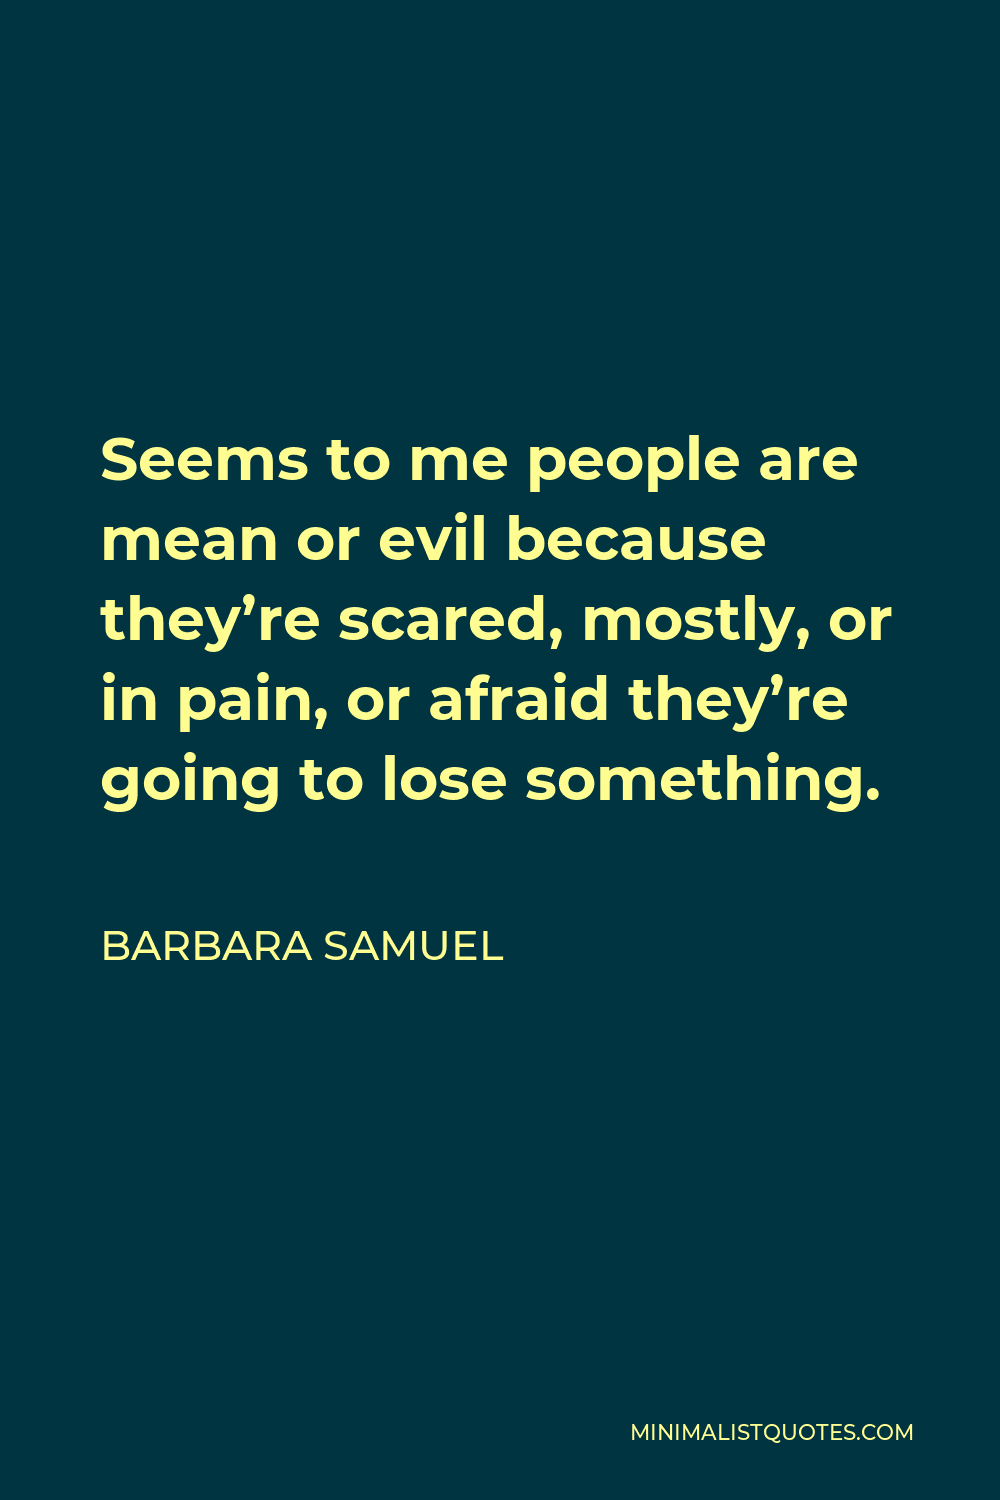 Barbara Samuel Quote - Seems to me people are mean or evil because they’re scared, mostly, or in pain, or afraid they’re going to lose something.